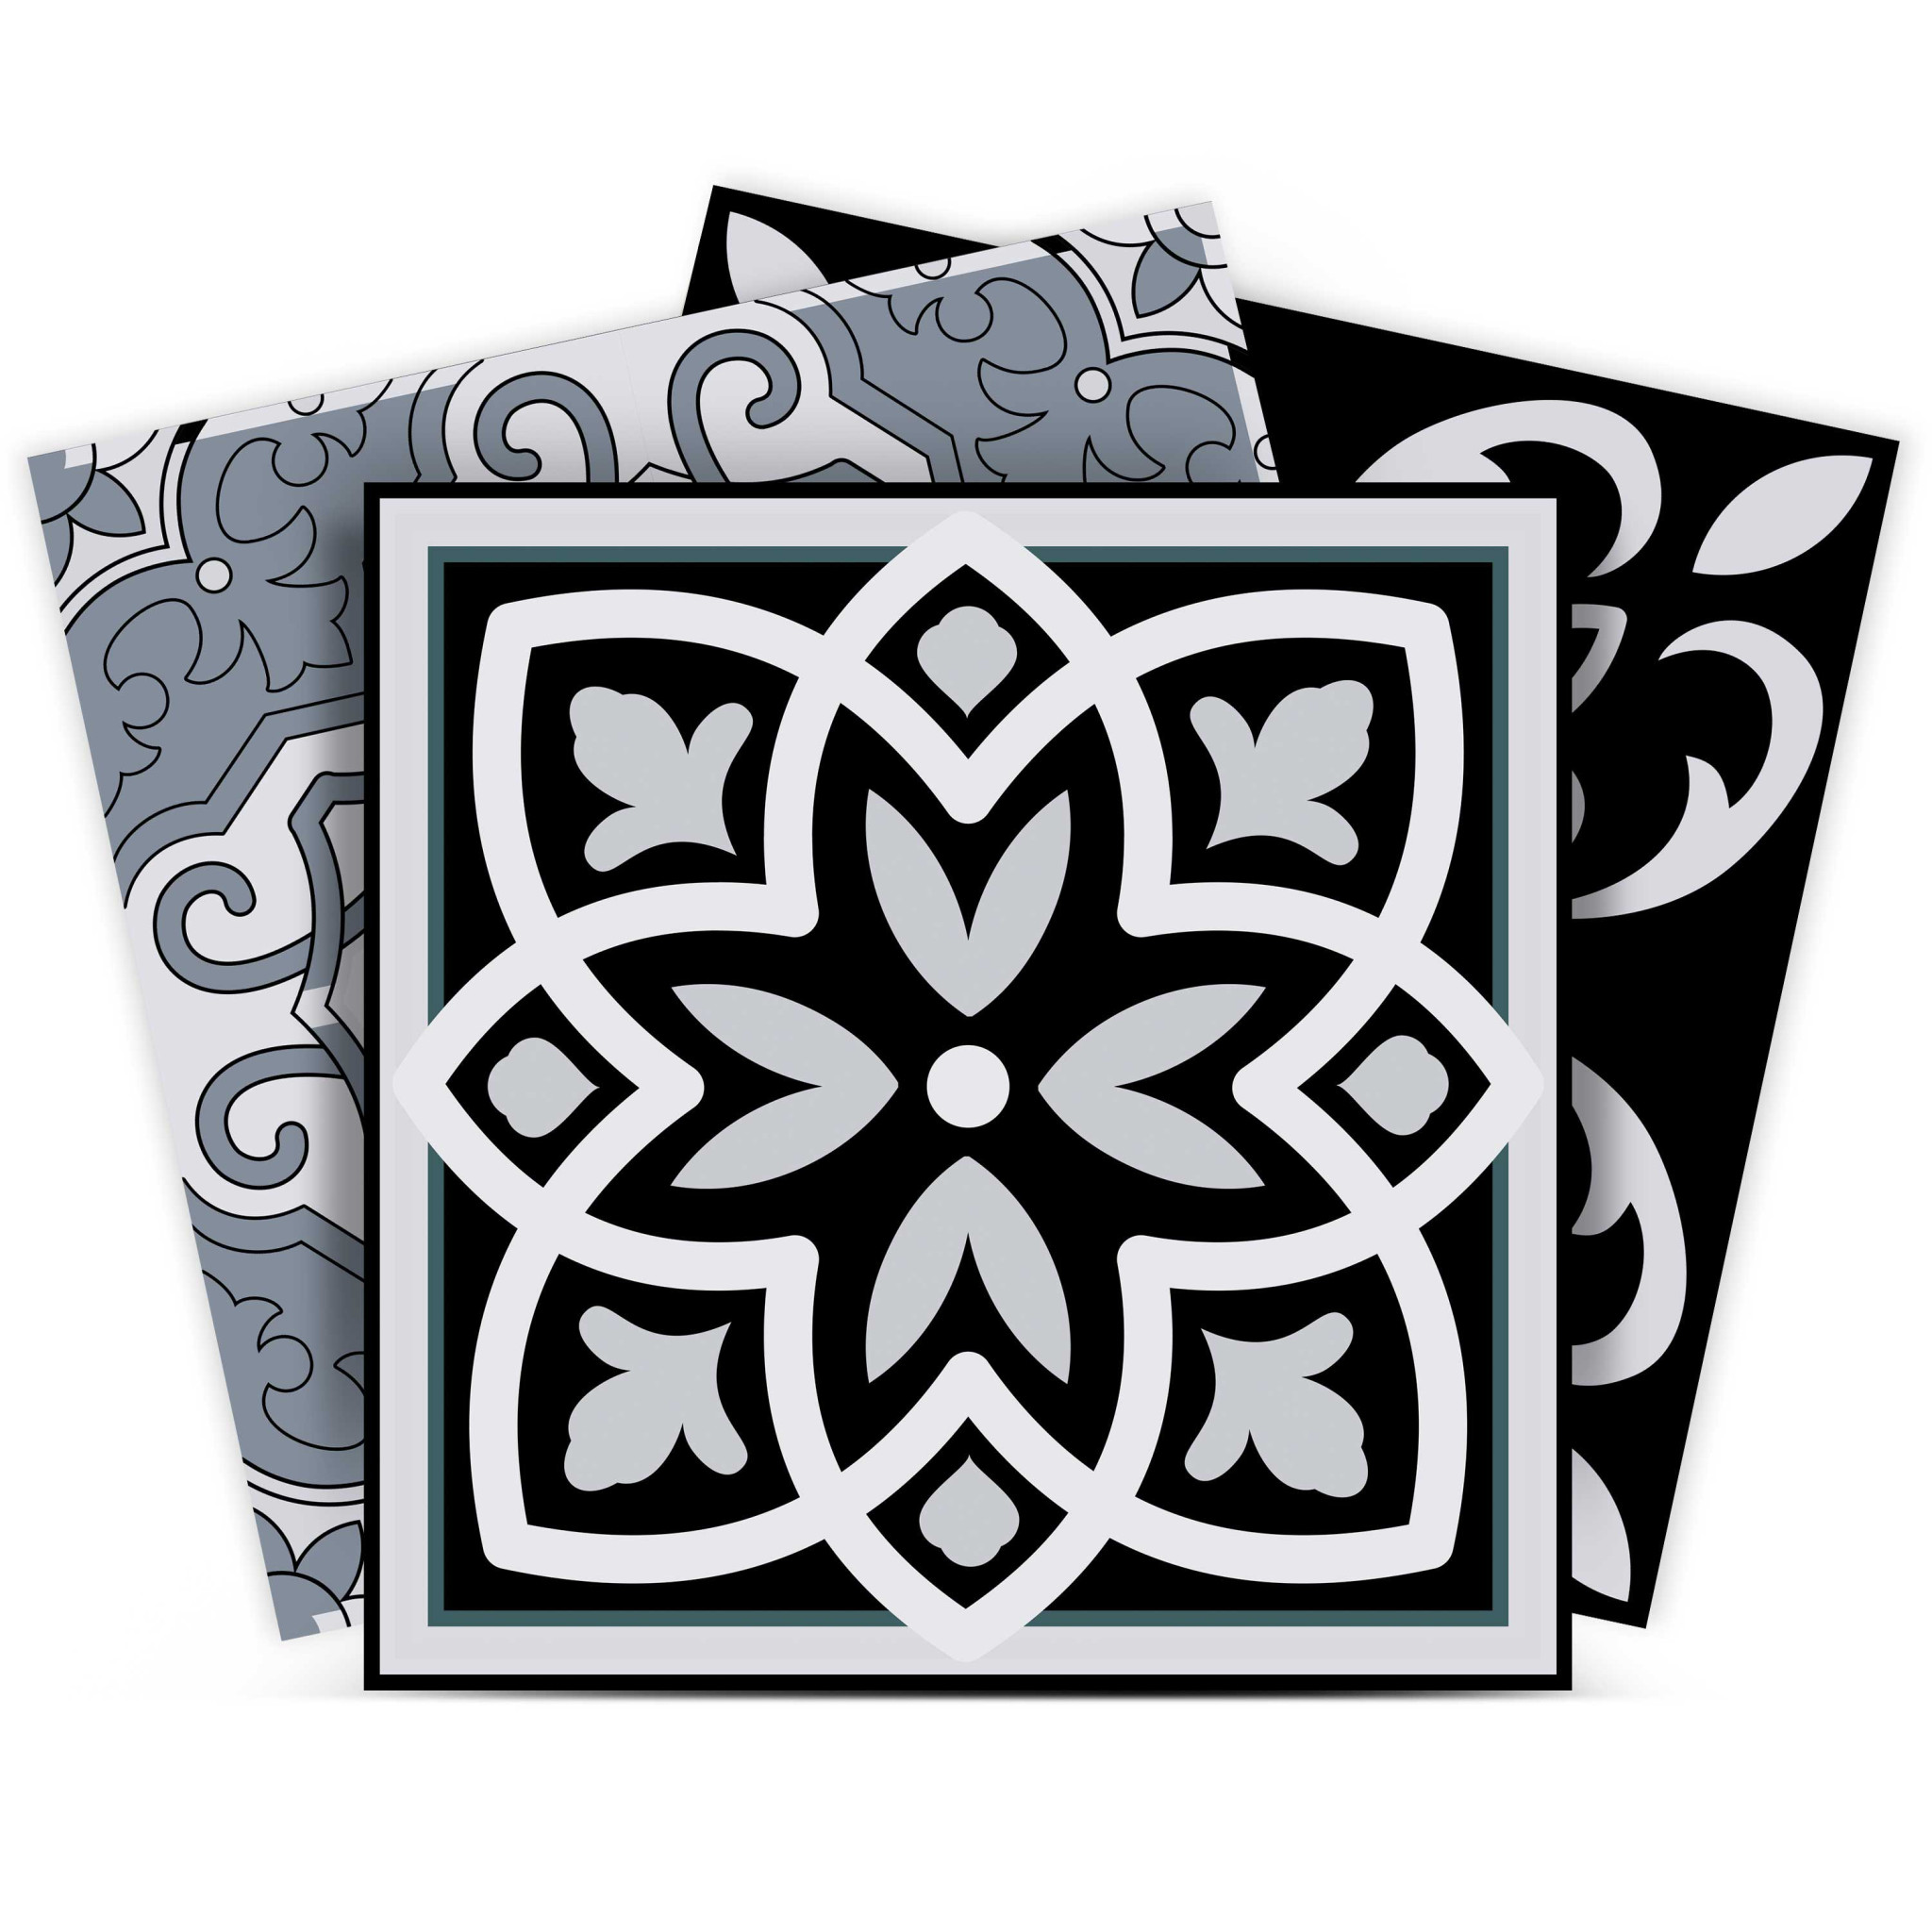 8" X 8" Black White and Gray Mosaic Peel and Stick Tiles-399874-1